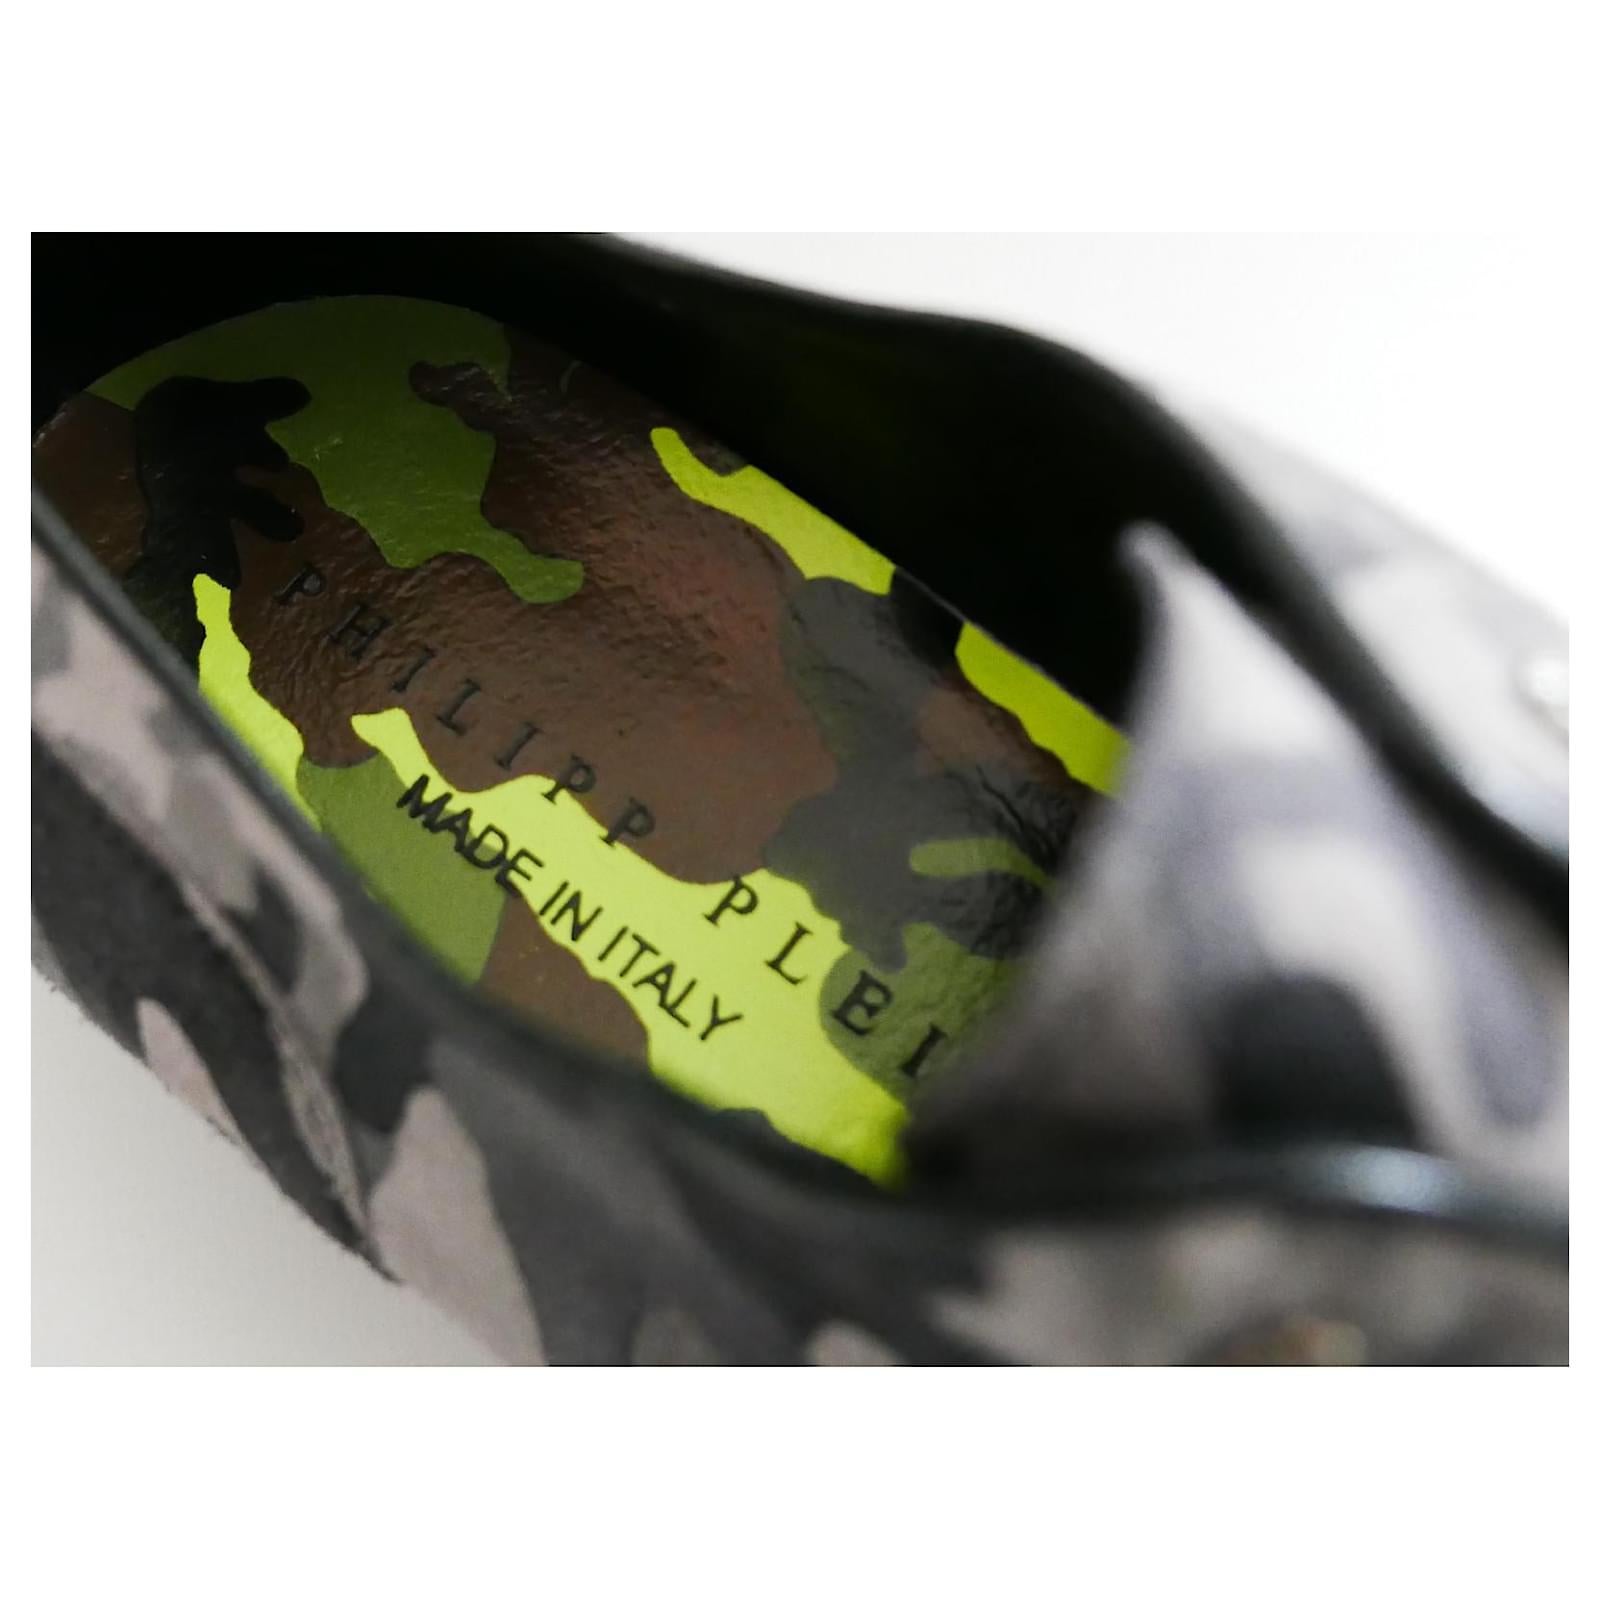 Philipp Plein SS14 Camouflage Skull Class Shoes For Sale 2